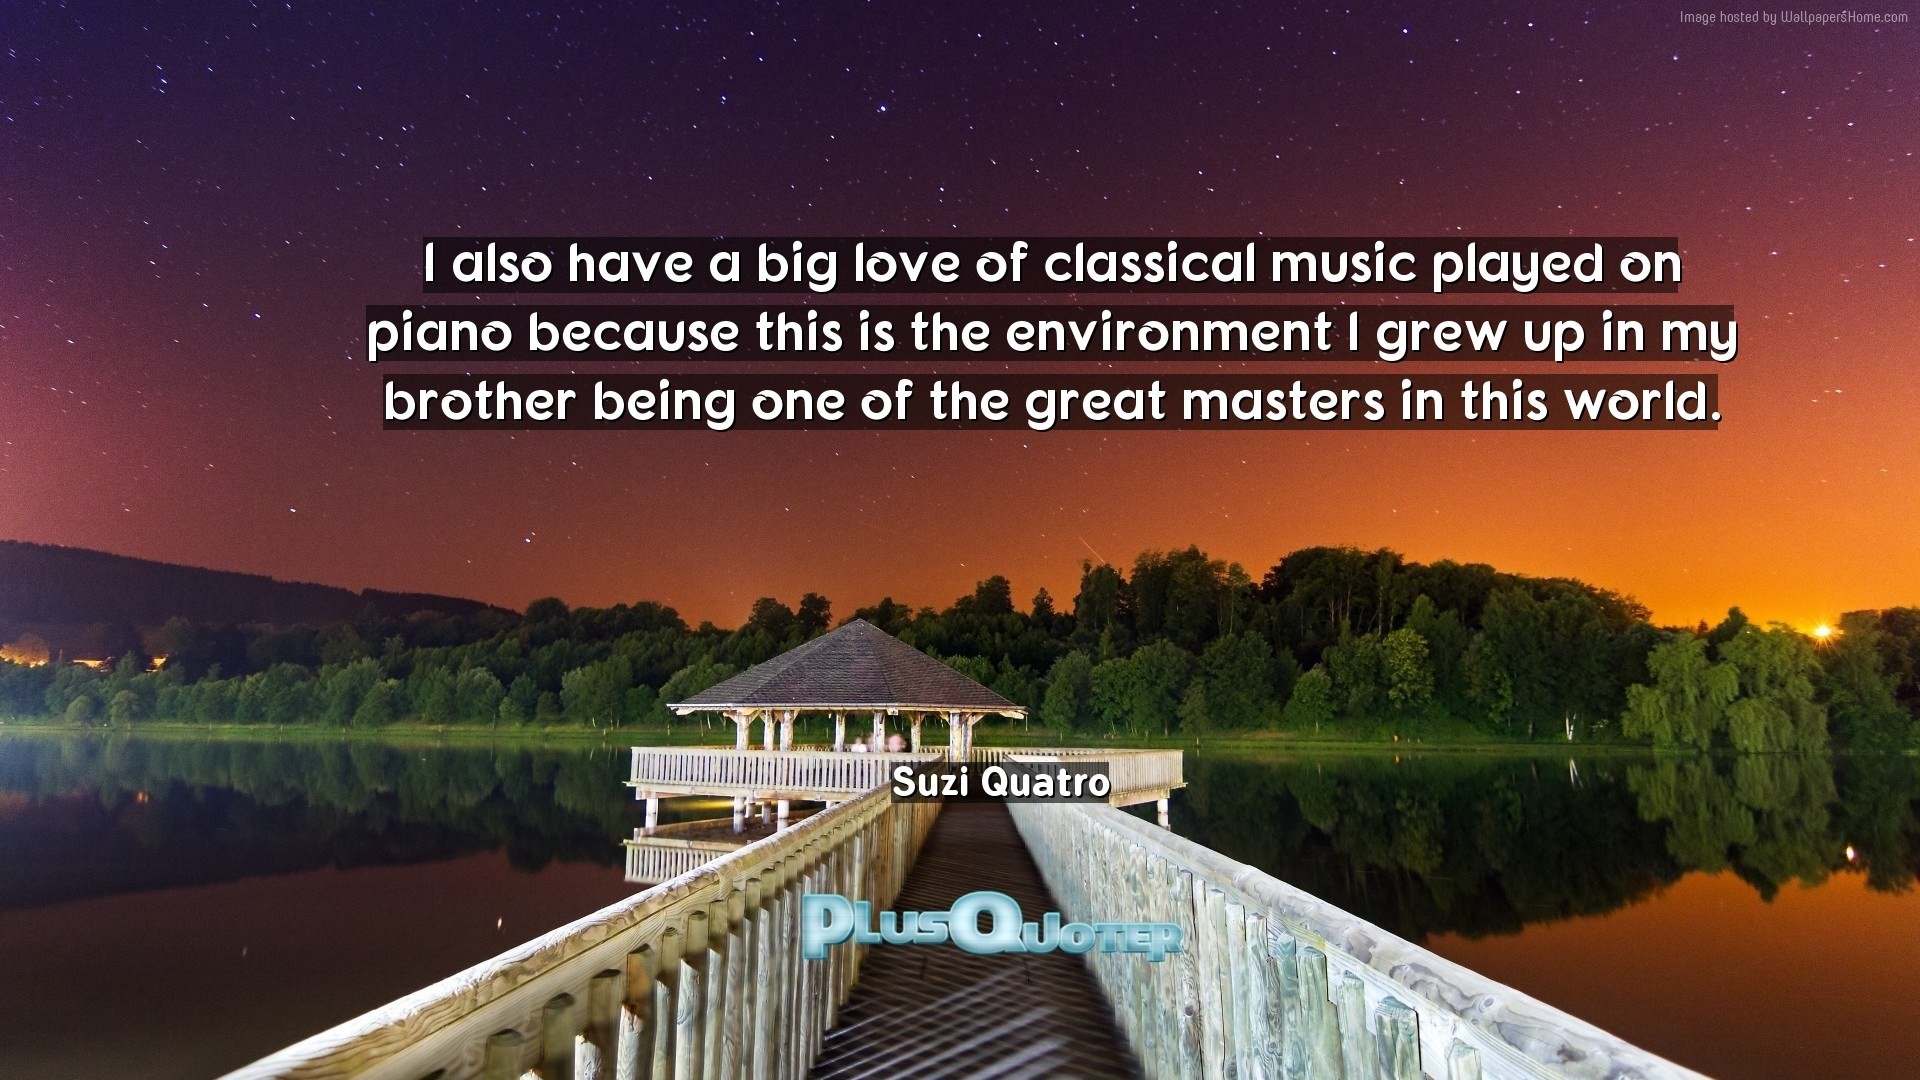 1920x1080 Download Wallpaper with inspirational Quotes- "I also have a big love of classical  music